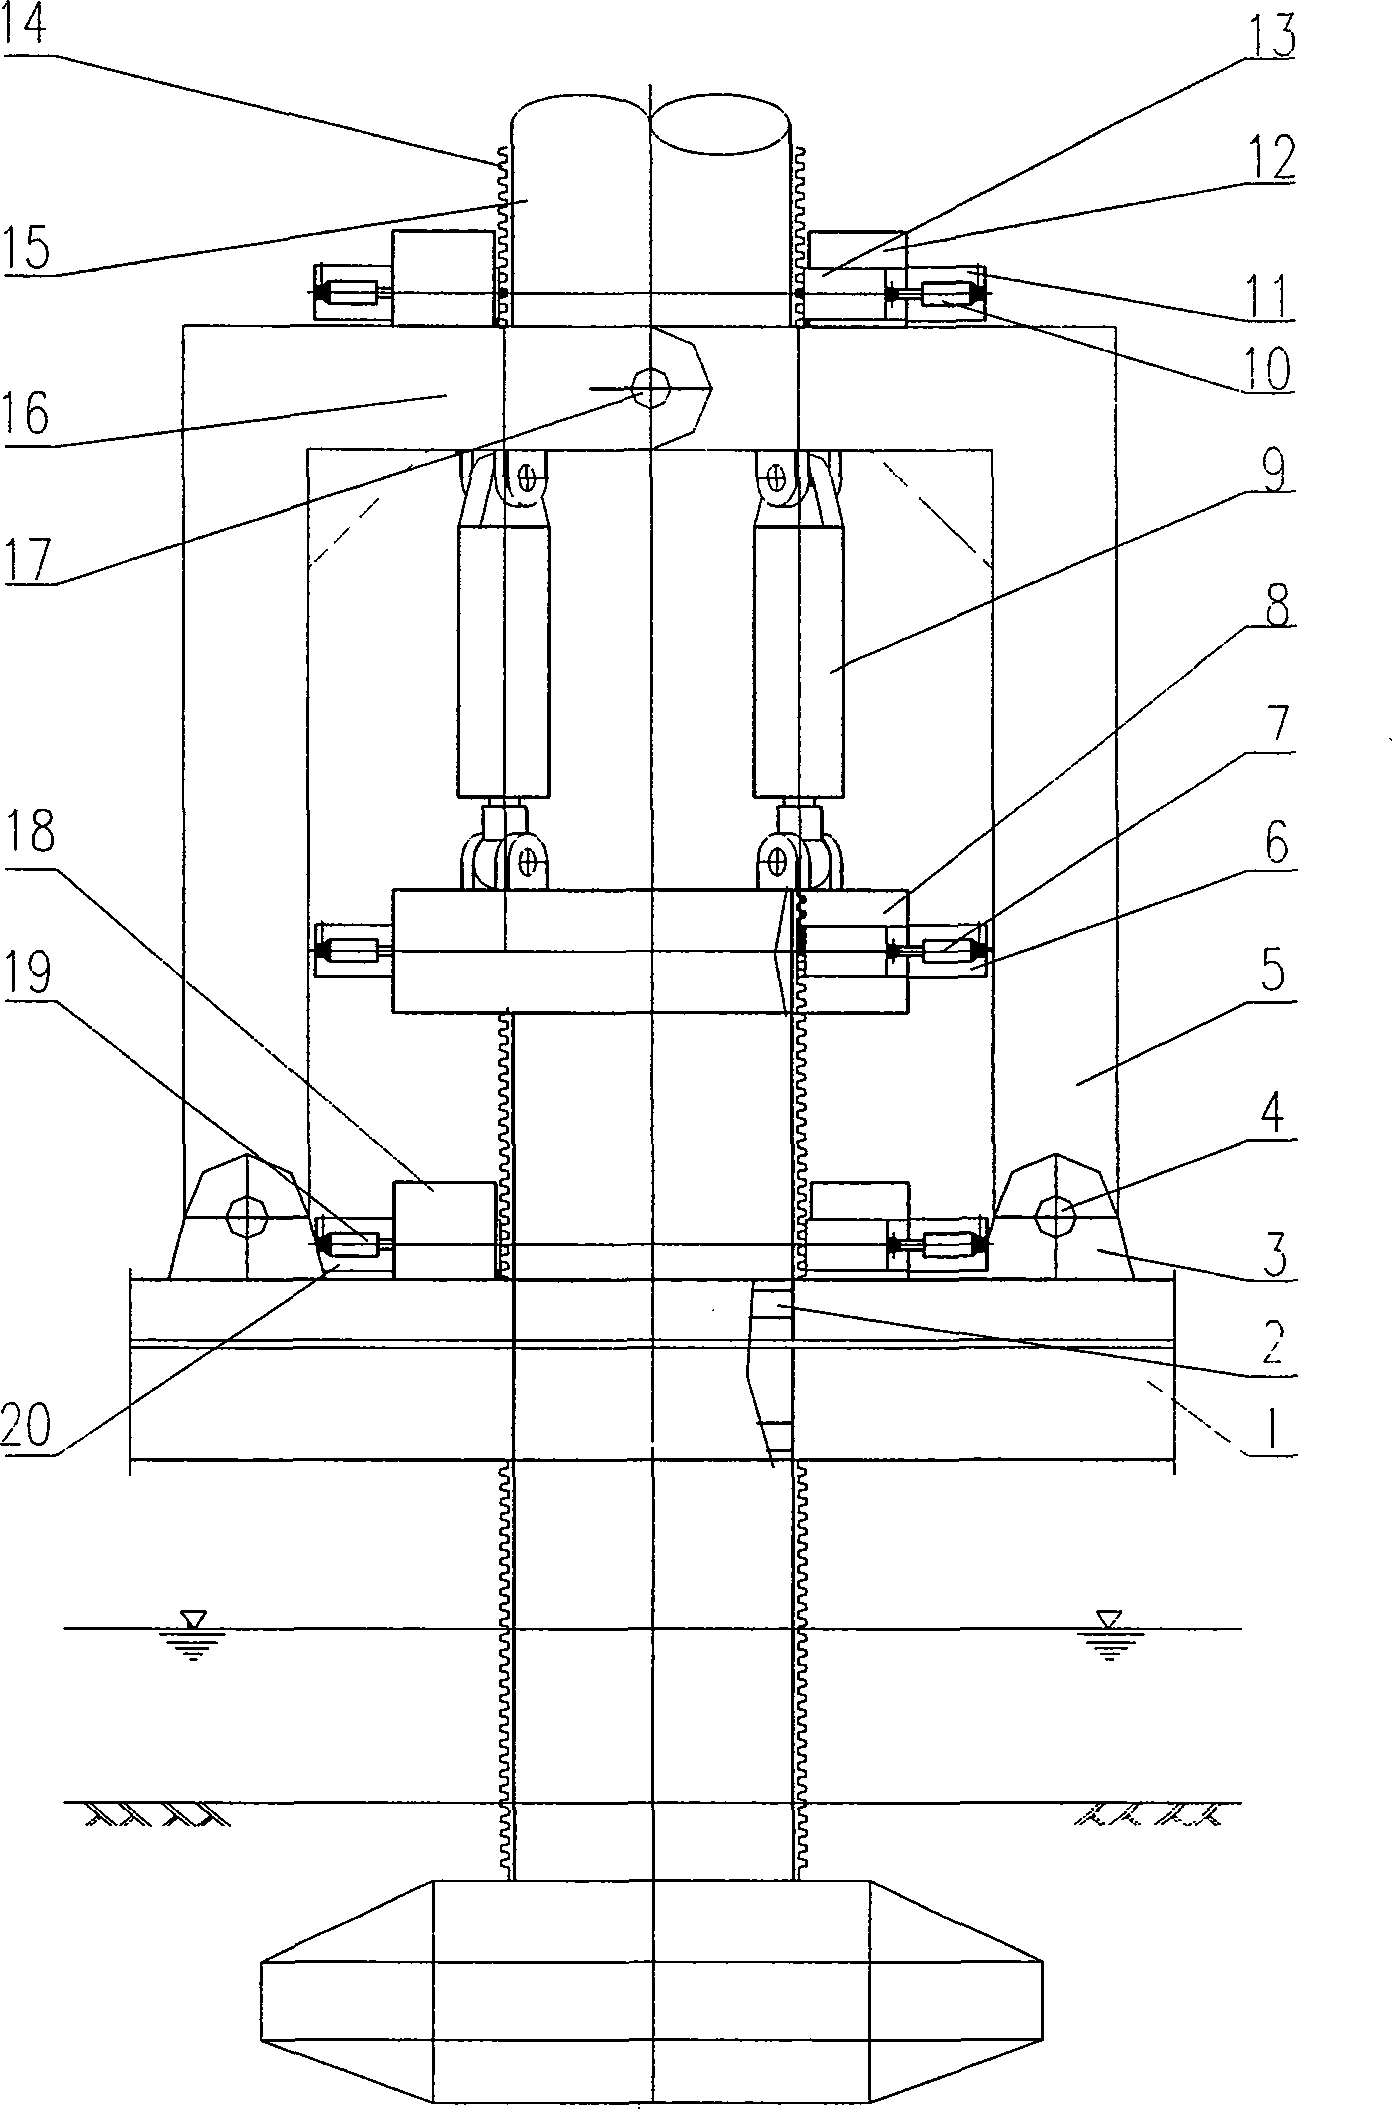 Repeatedly-usable elevator apparatus